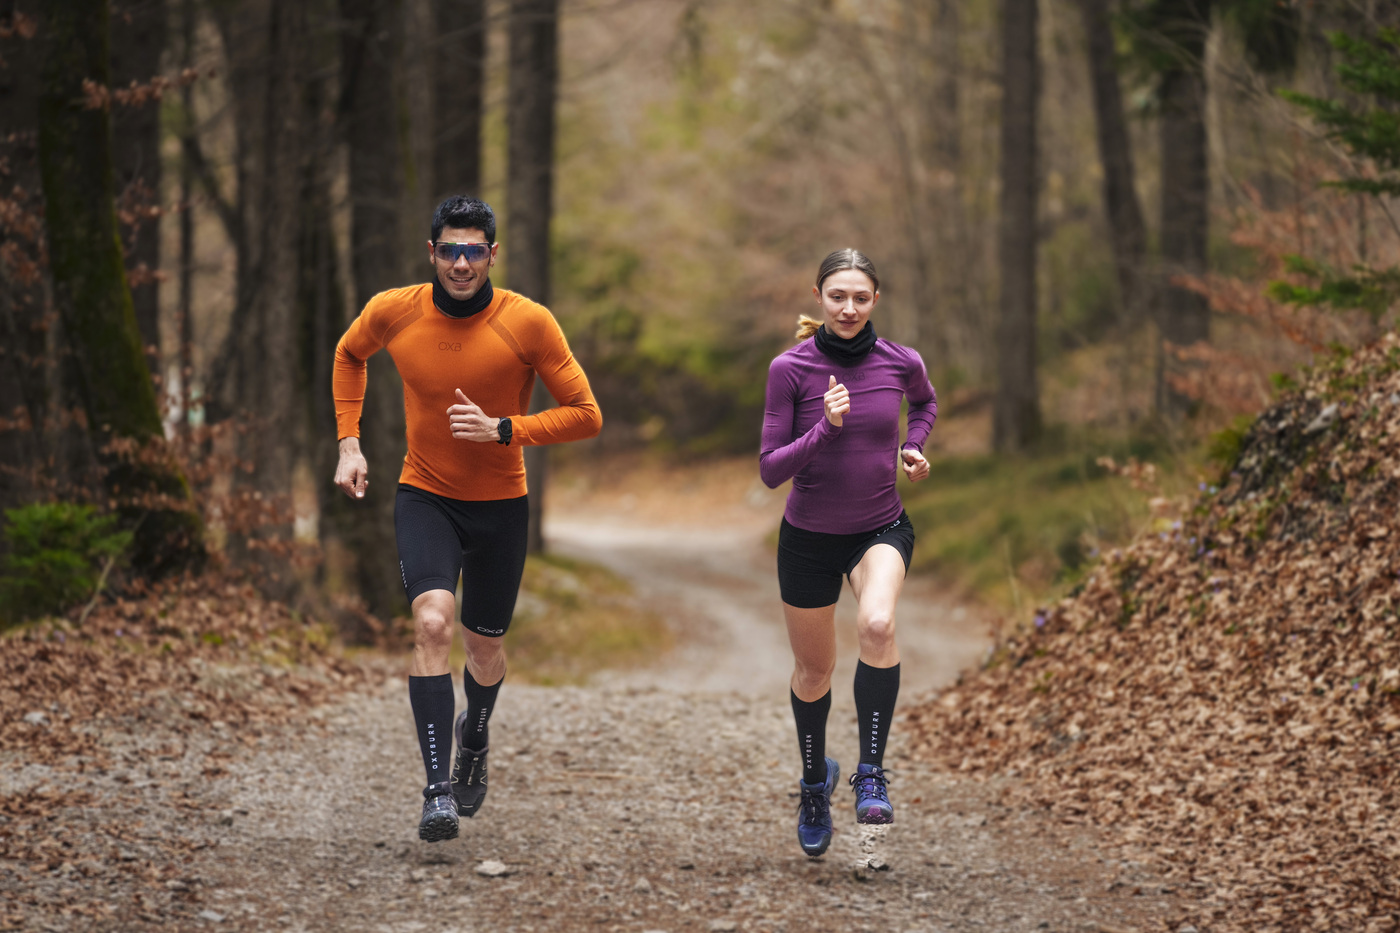 Oxyburn underwear for autumn running and hiking always at the right temperature